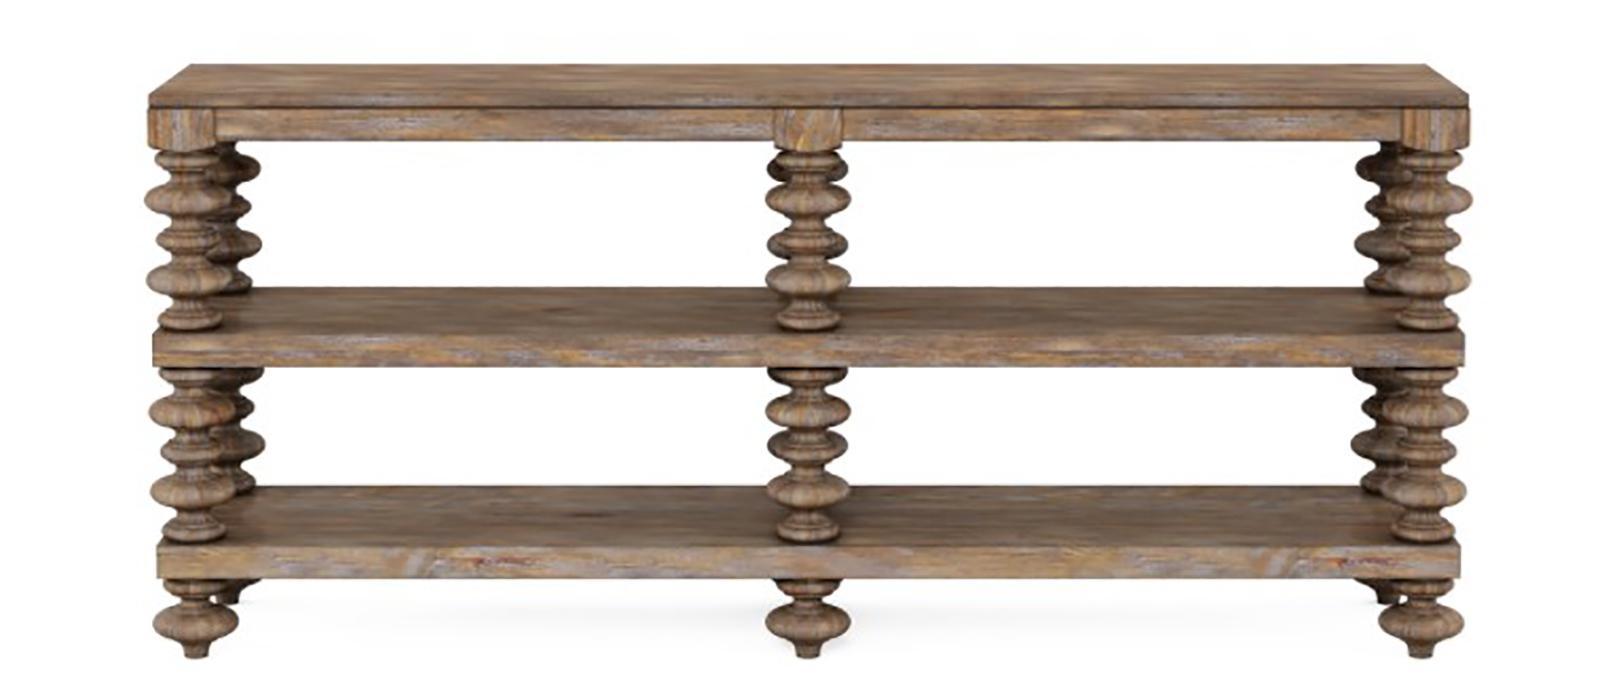 Furniture Architrave Console Table in Rustic Pine